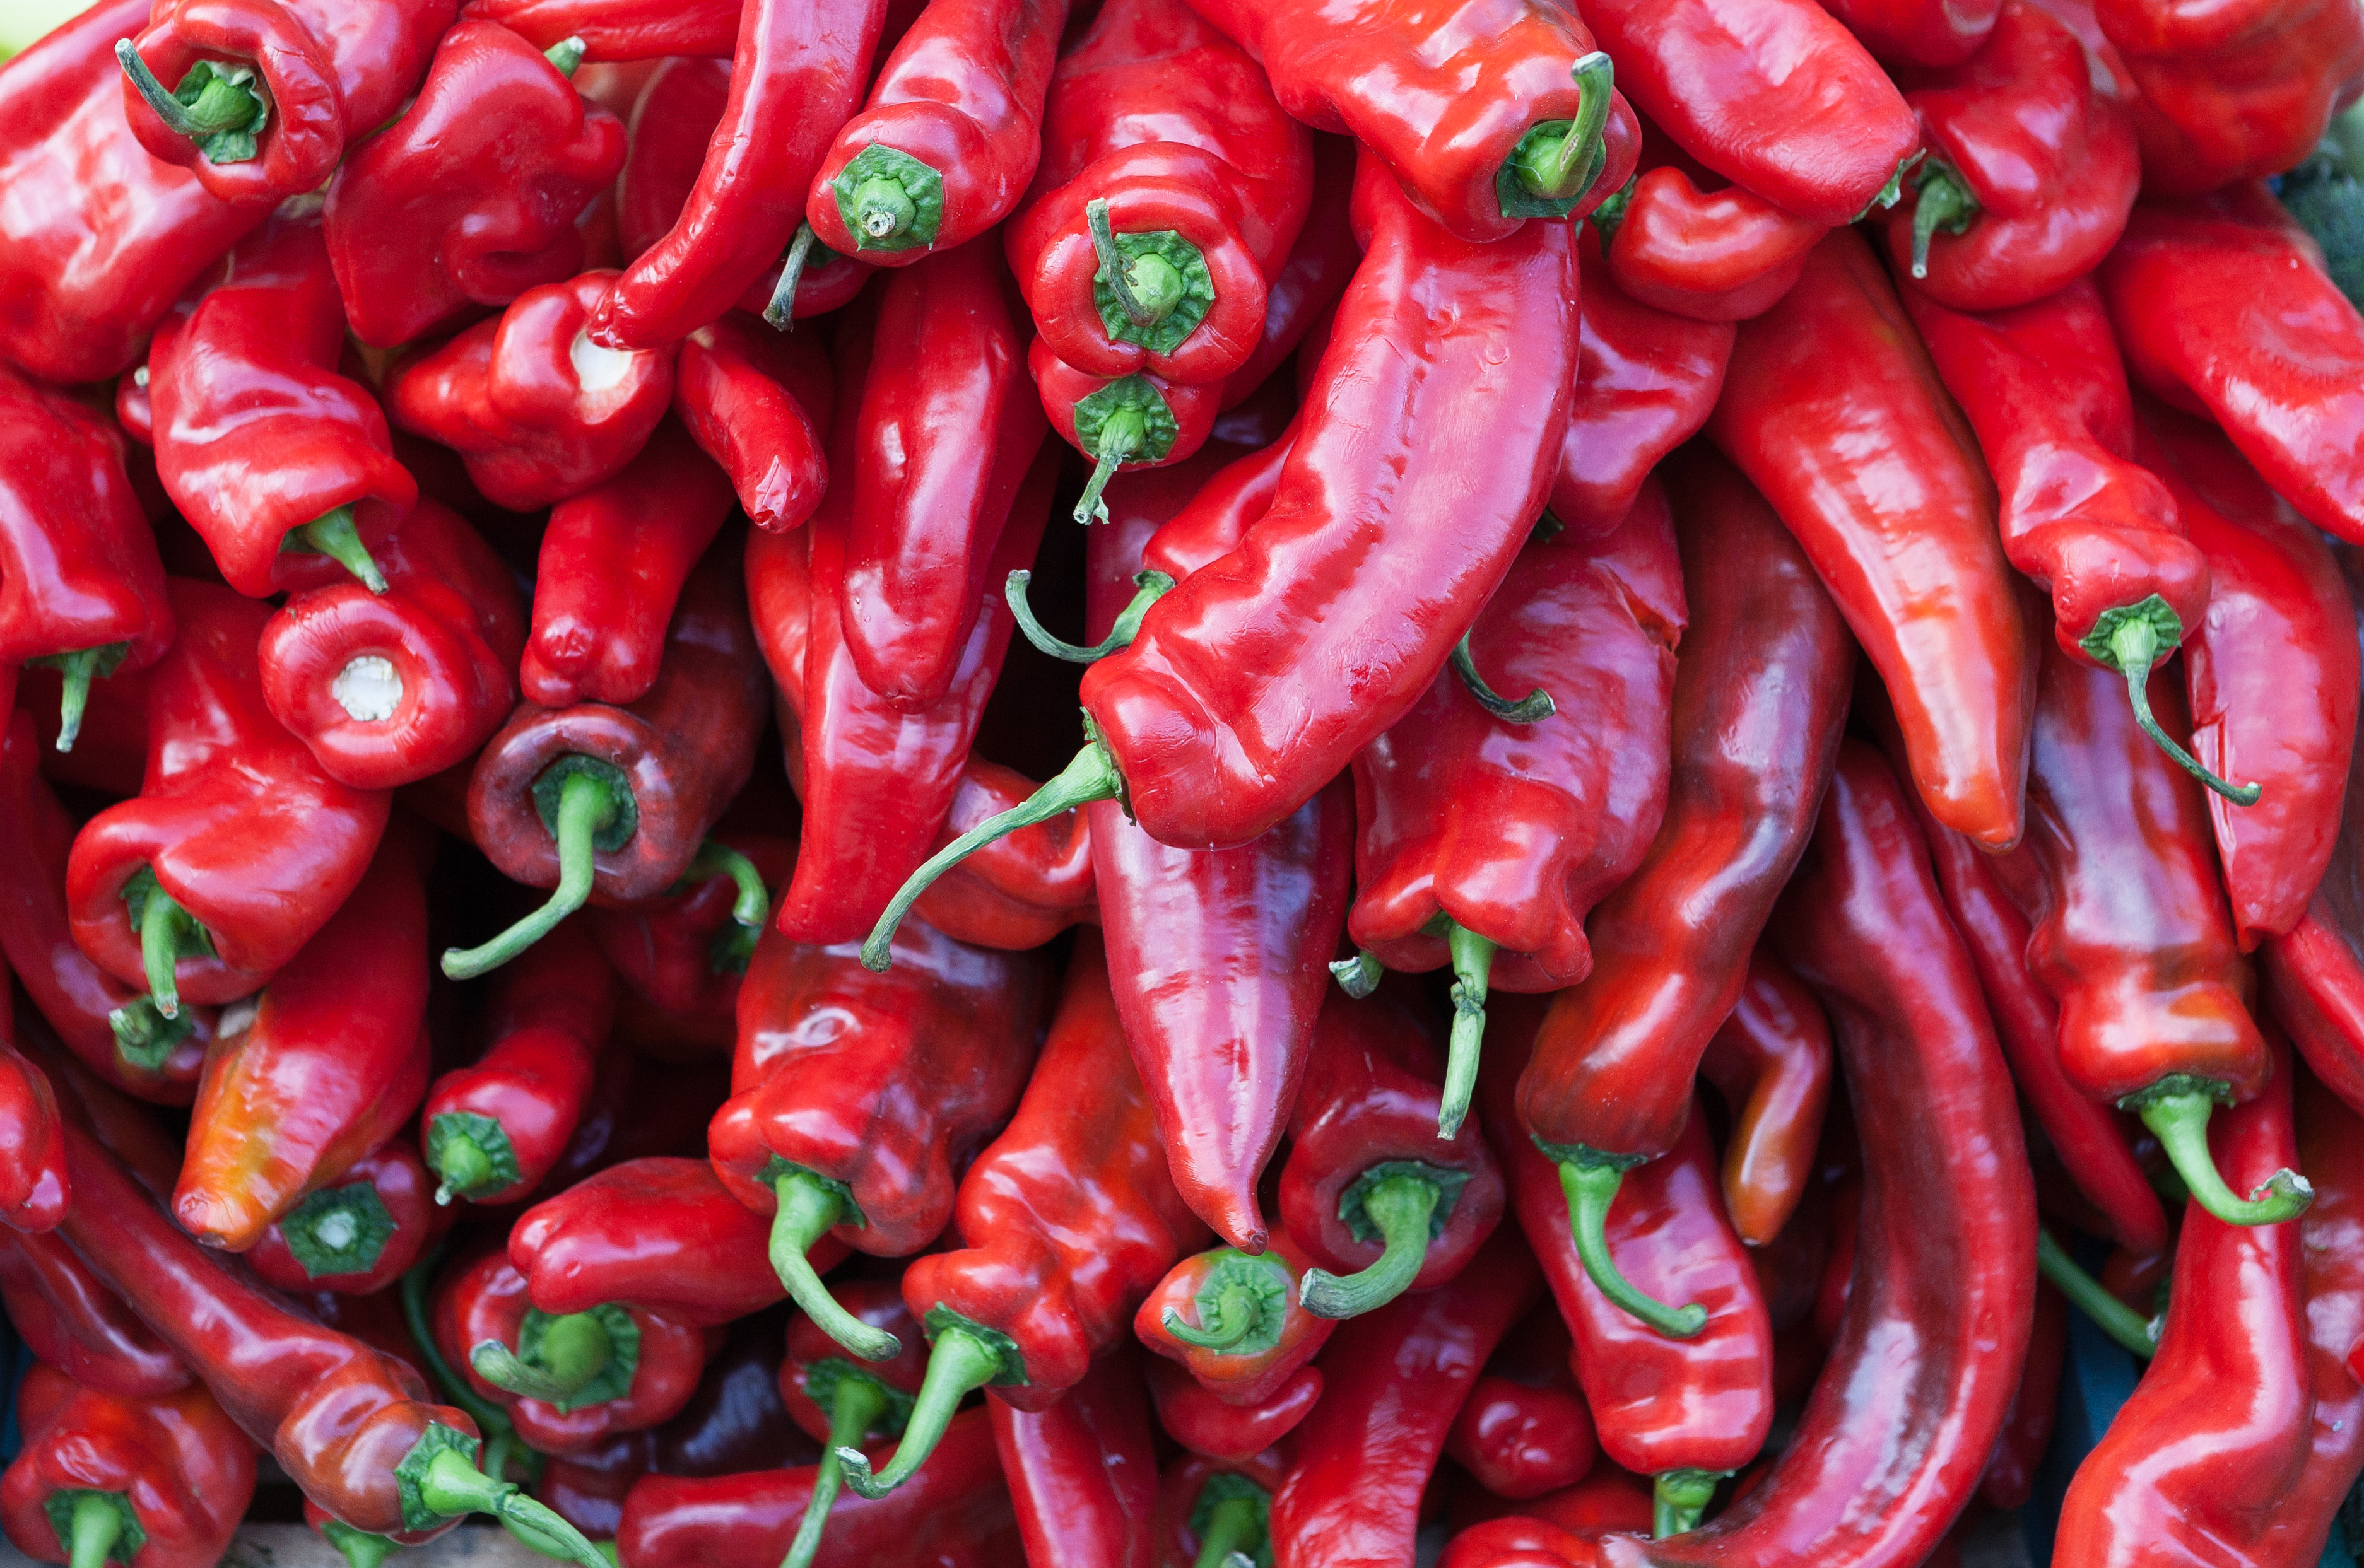 File:Red hot chilli peppers.jpg - Wikimedia Commons